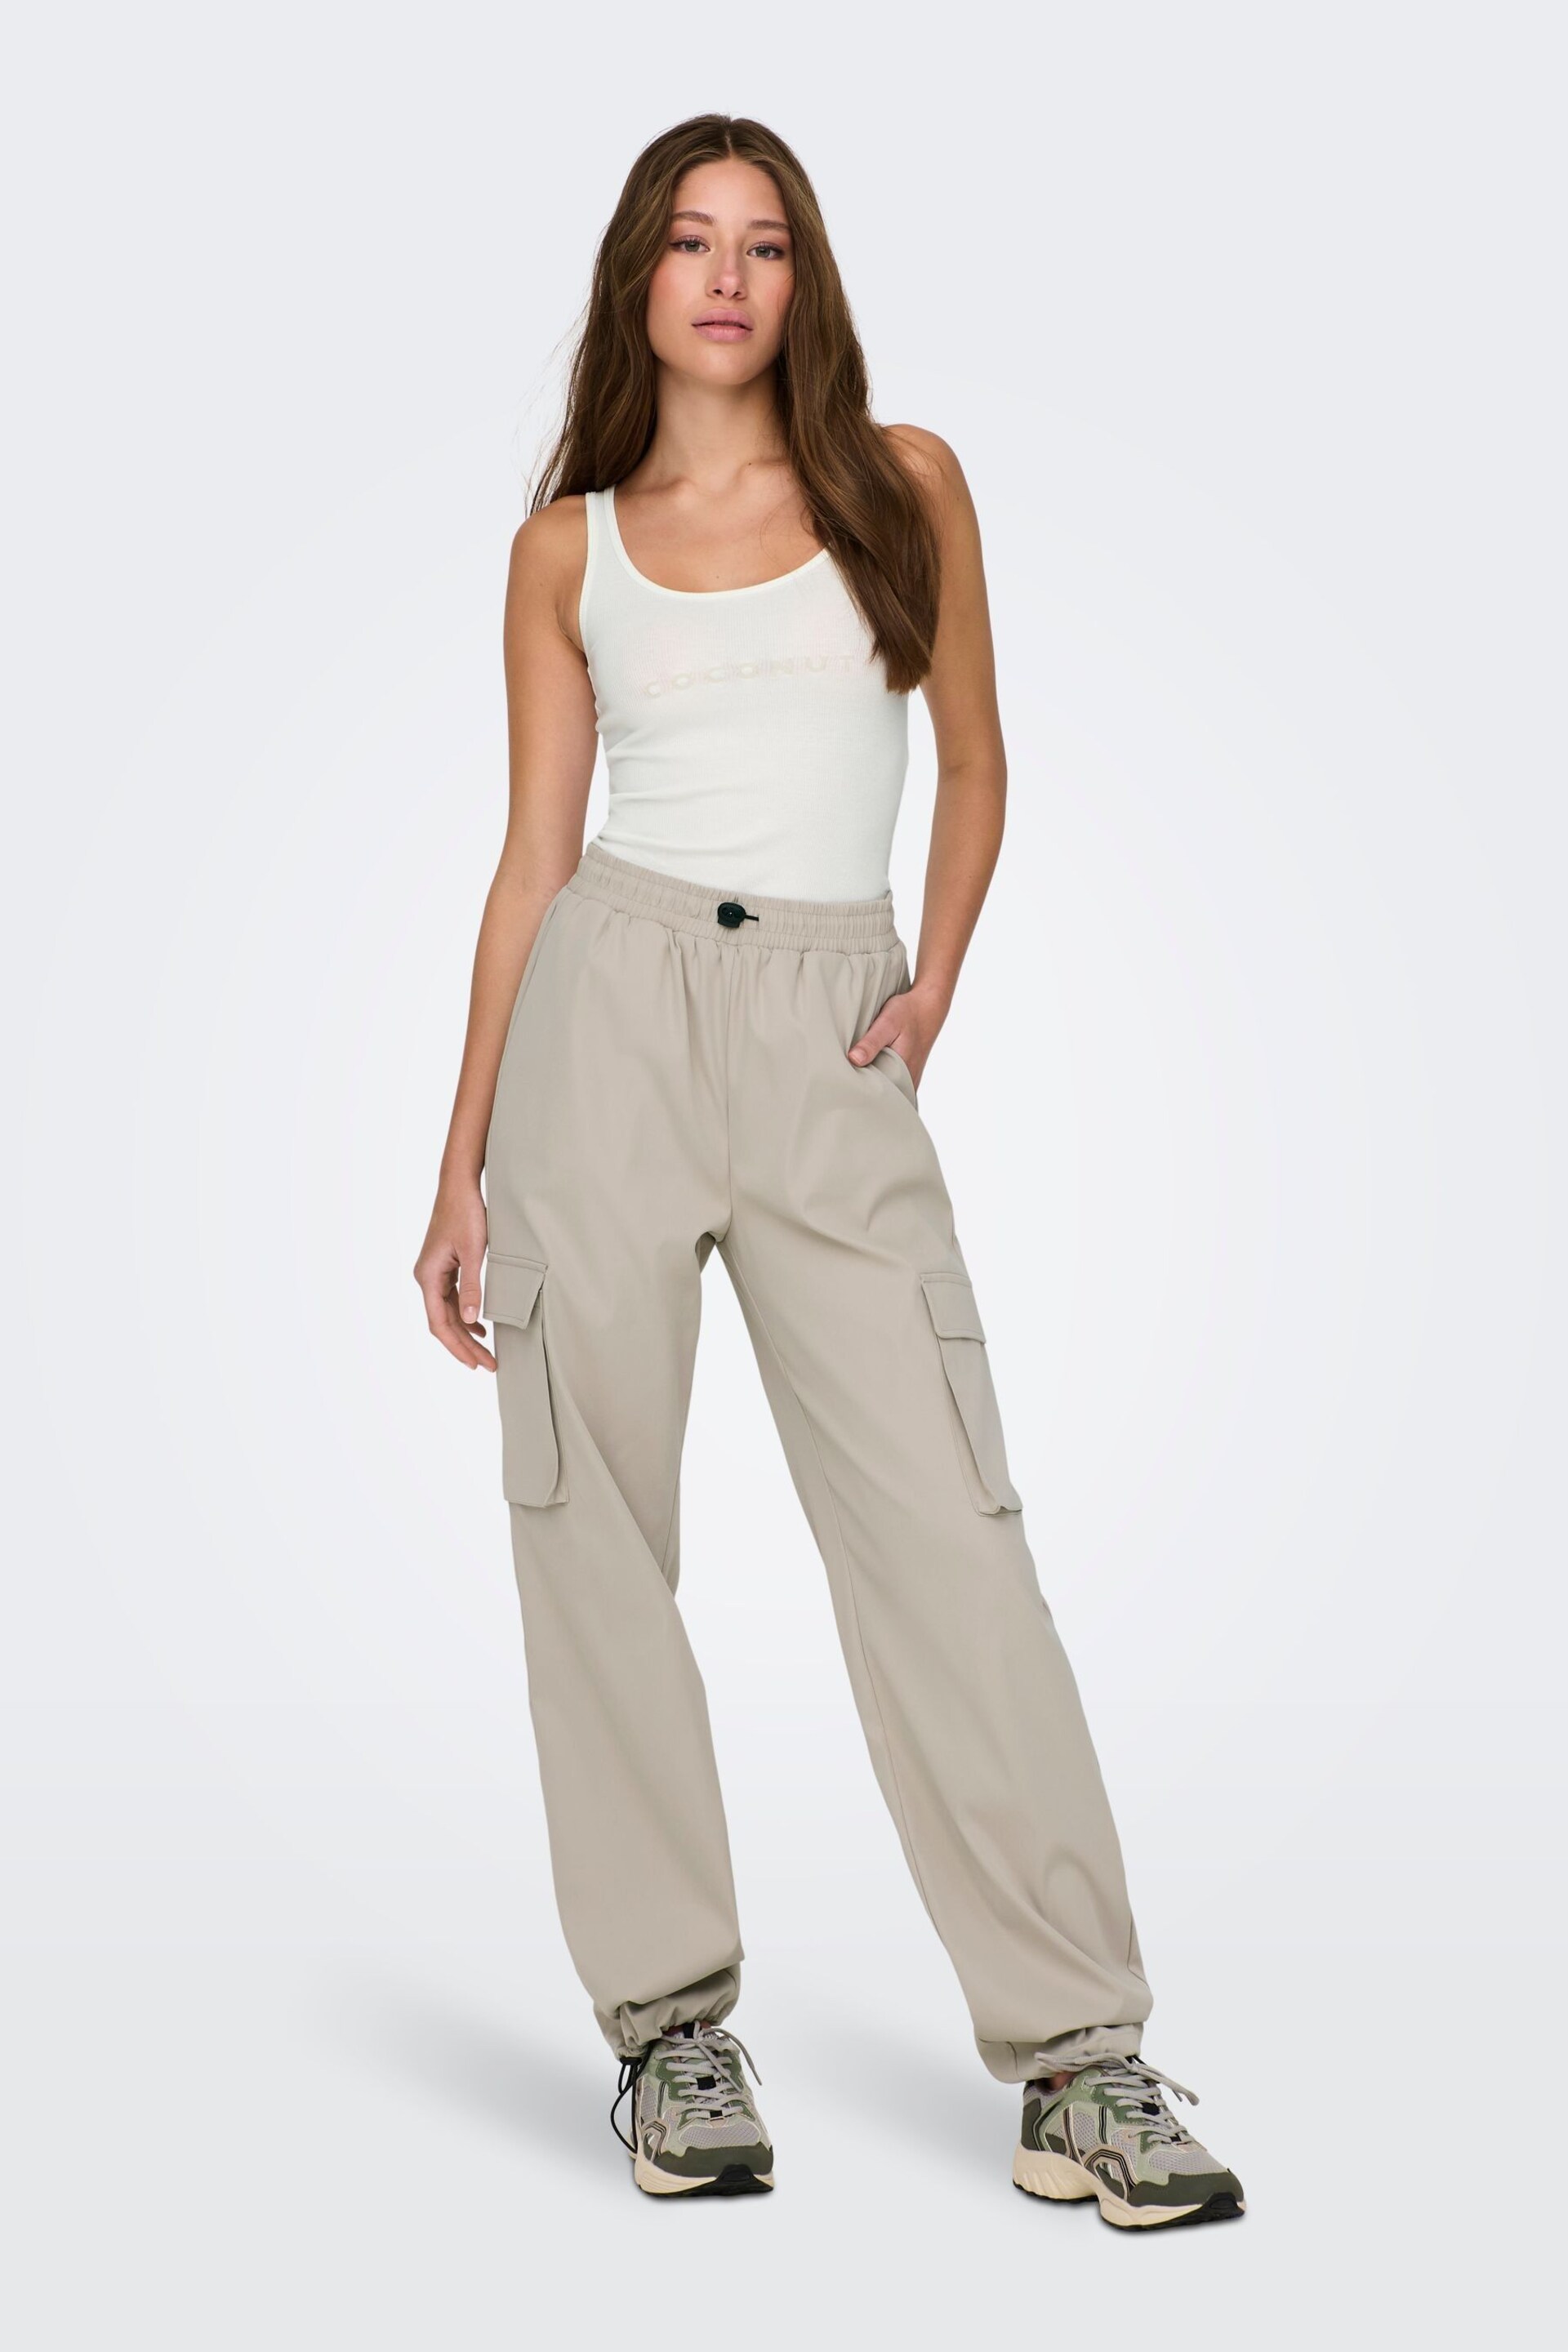 ONLY Cream Cargo Trouser - Image 2 of 5